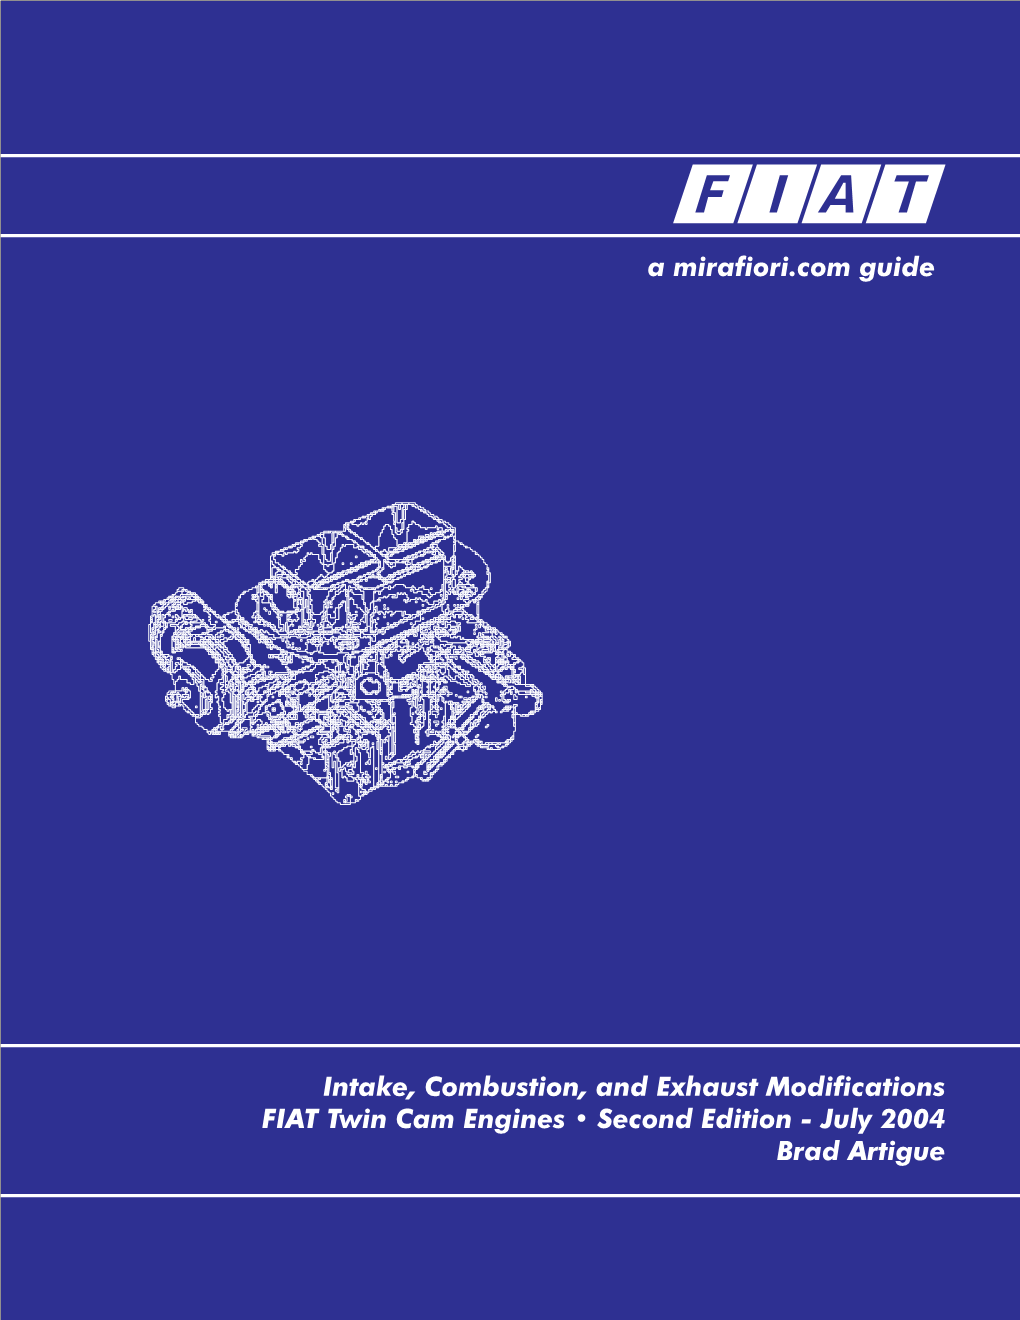 Intake, Combustion, and Exhaust Modifications FIAT Twin Cam Engines • Second Edition - July 2004 Brad Artigue Contents